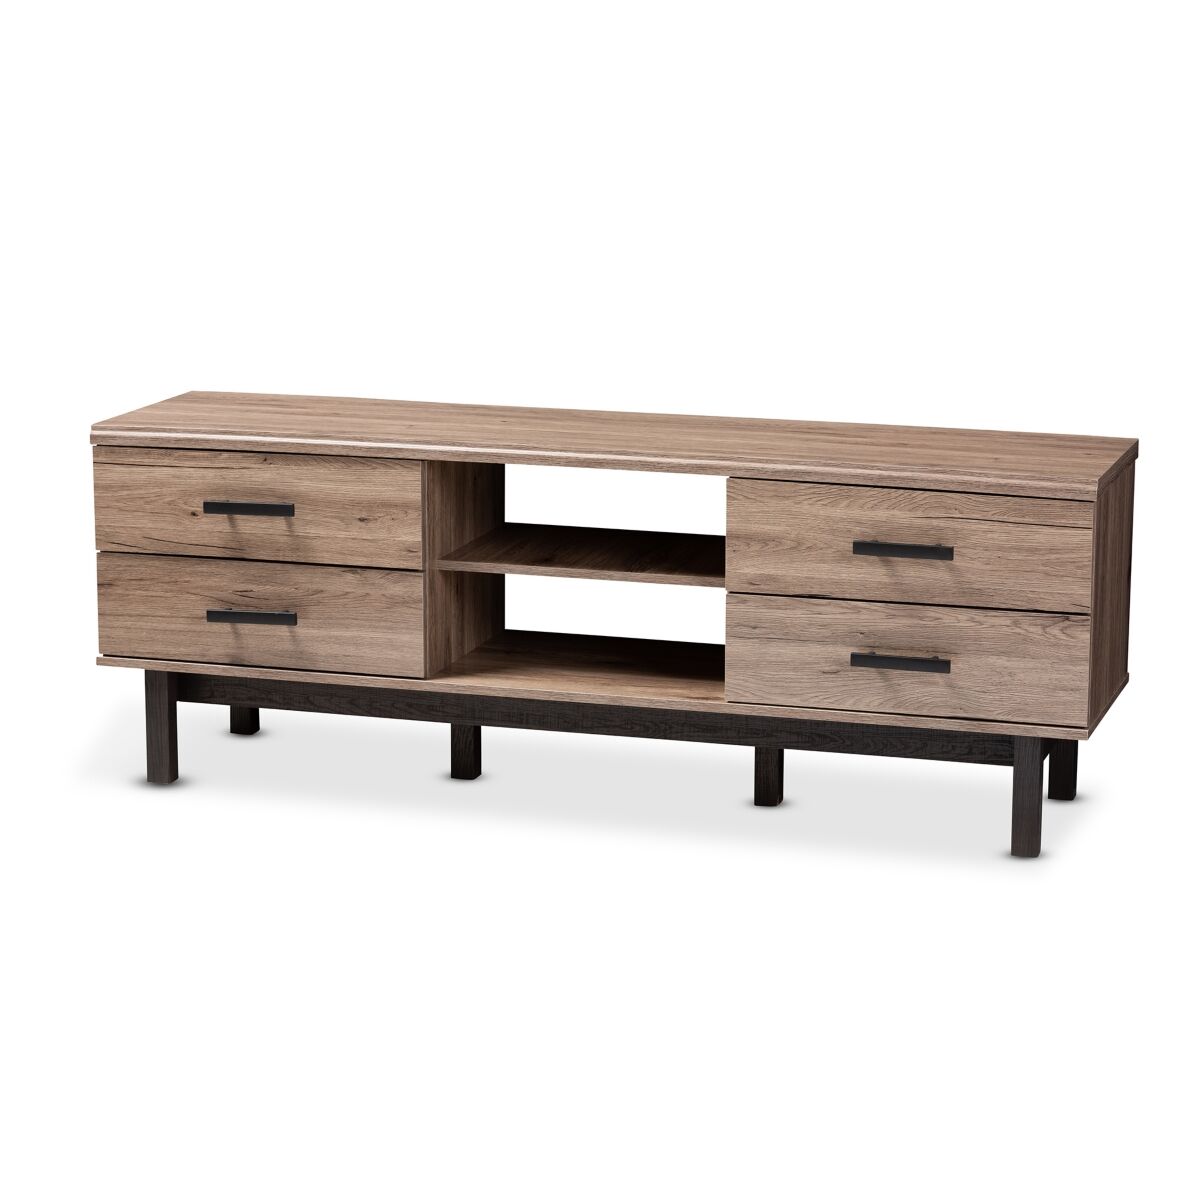 Furniture Arend 4-Drawer Tv Stand - Brown